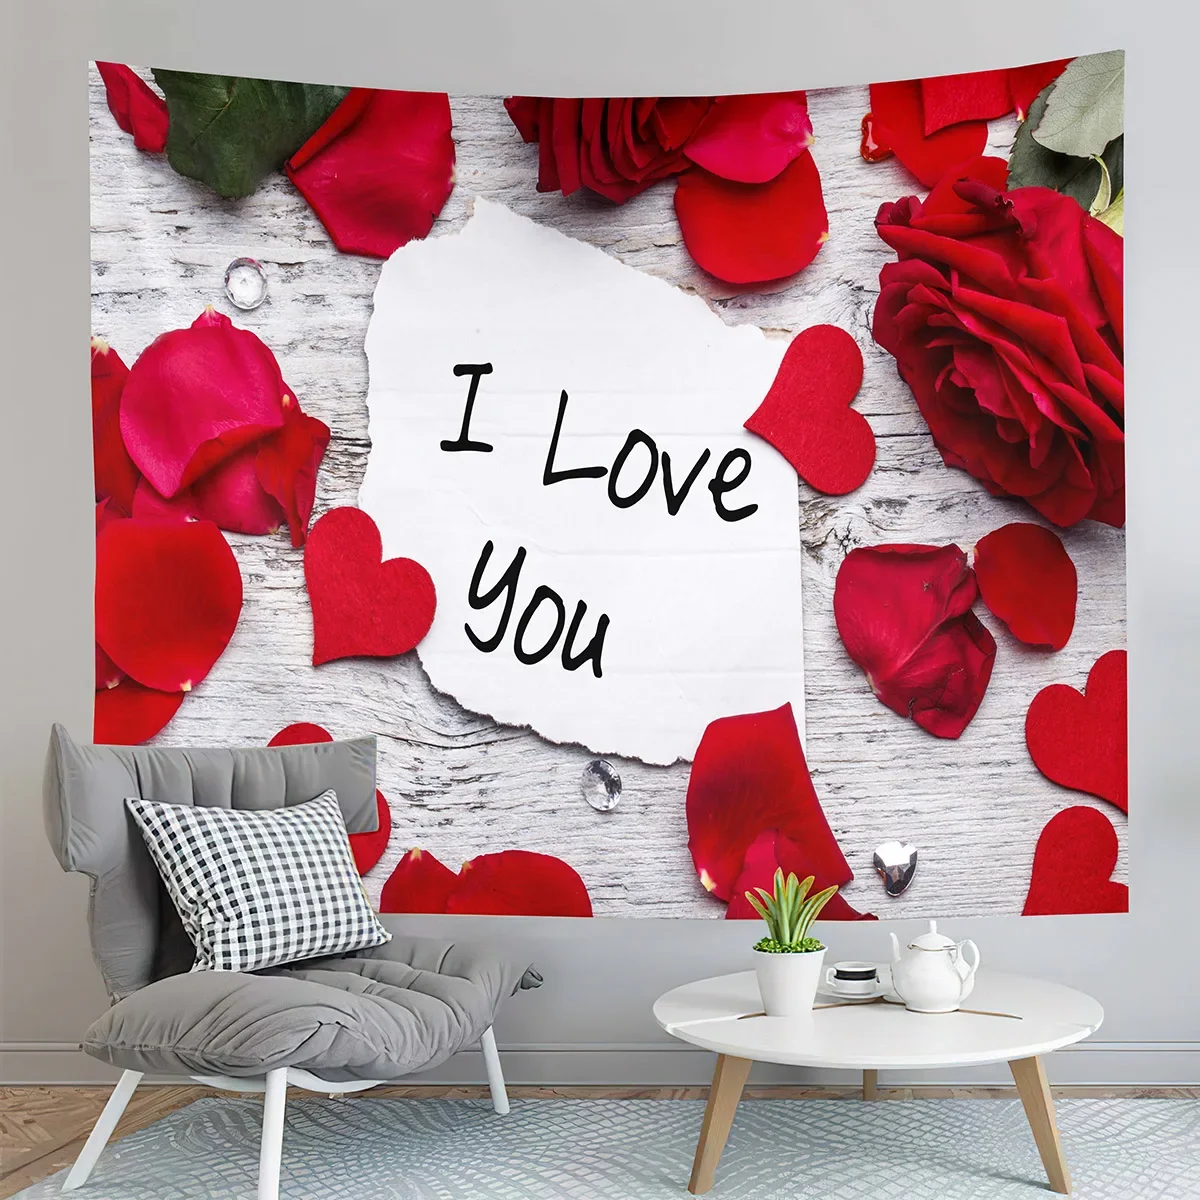 

Happy Valentine's Day Tapestry Red Rose and Love Heart Tapestry Art Decor Wall Hanging Home Living Room Bedroom Dorm Tapestries